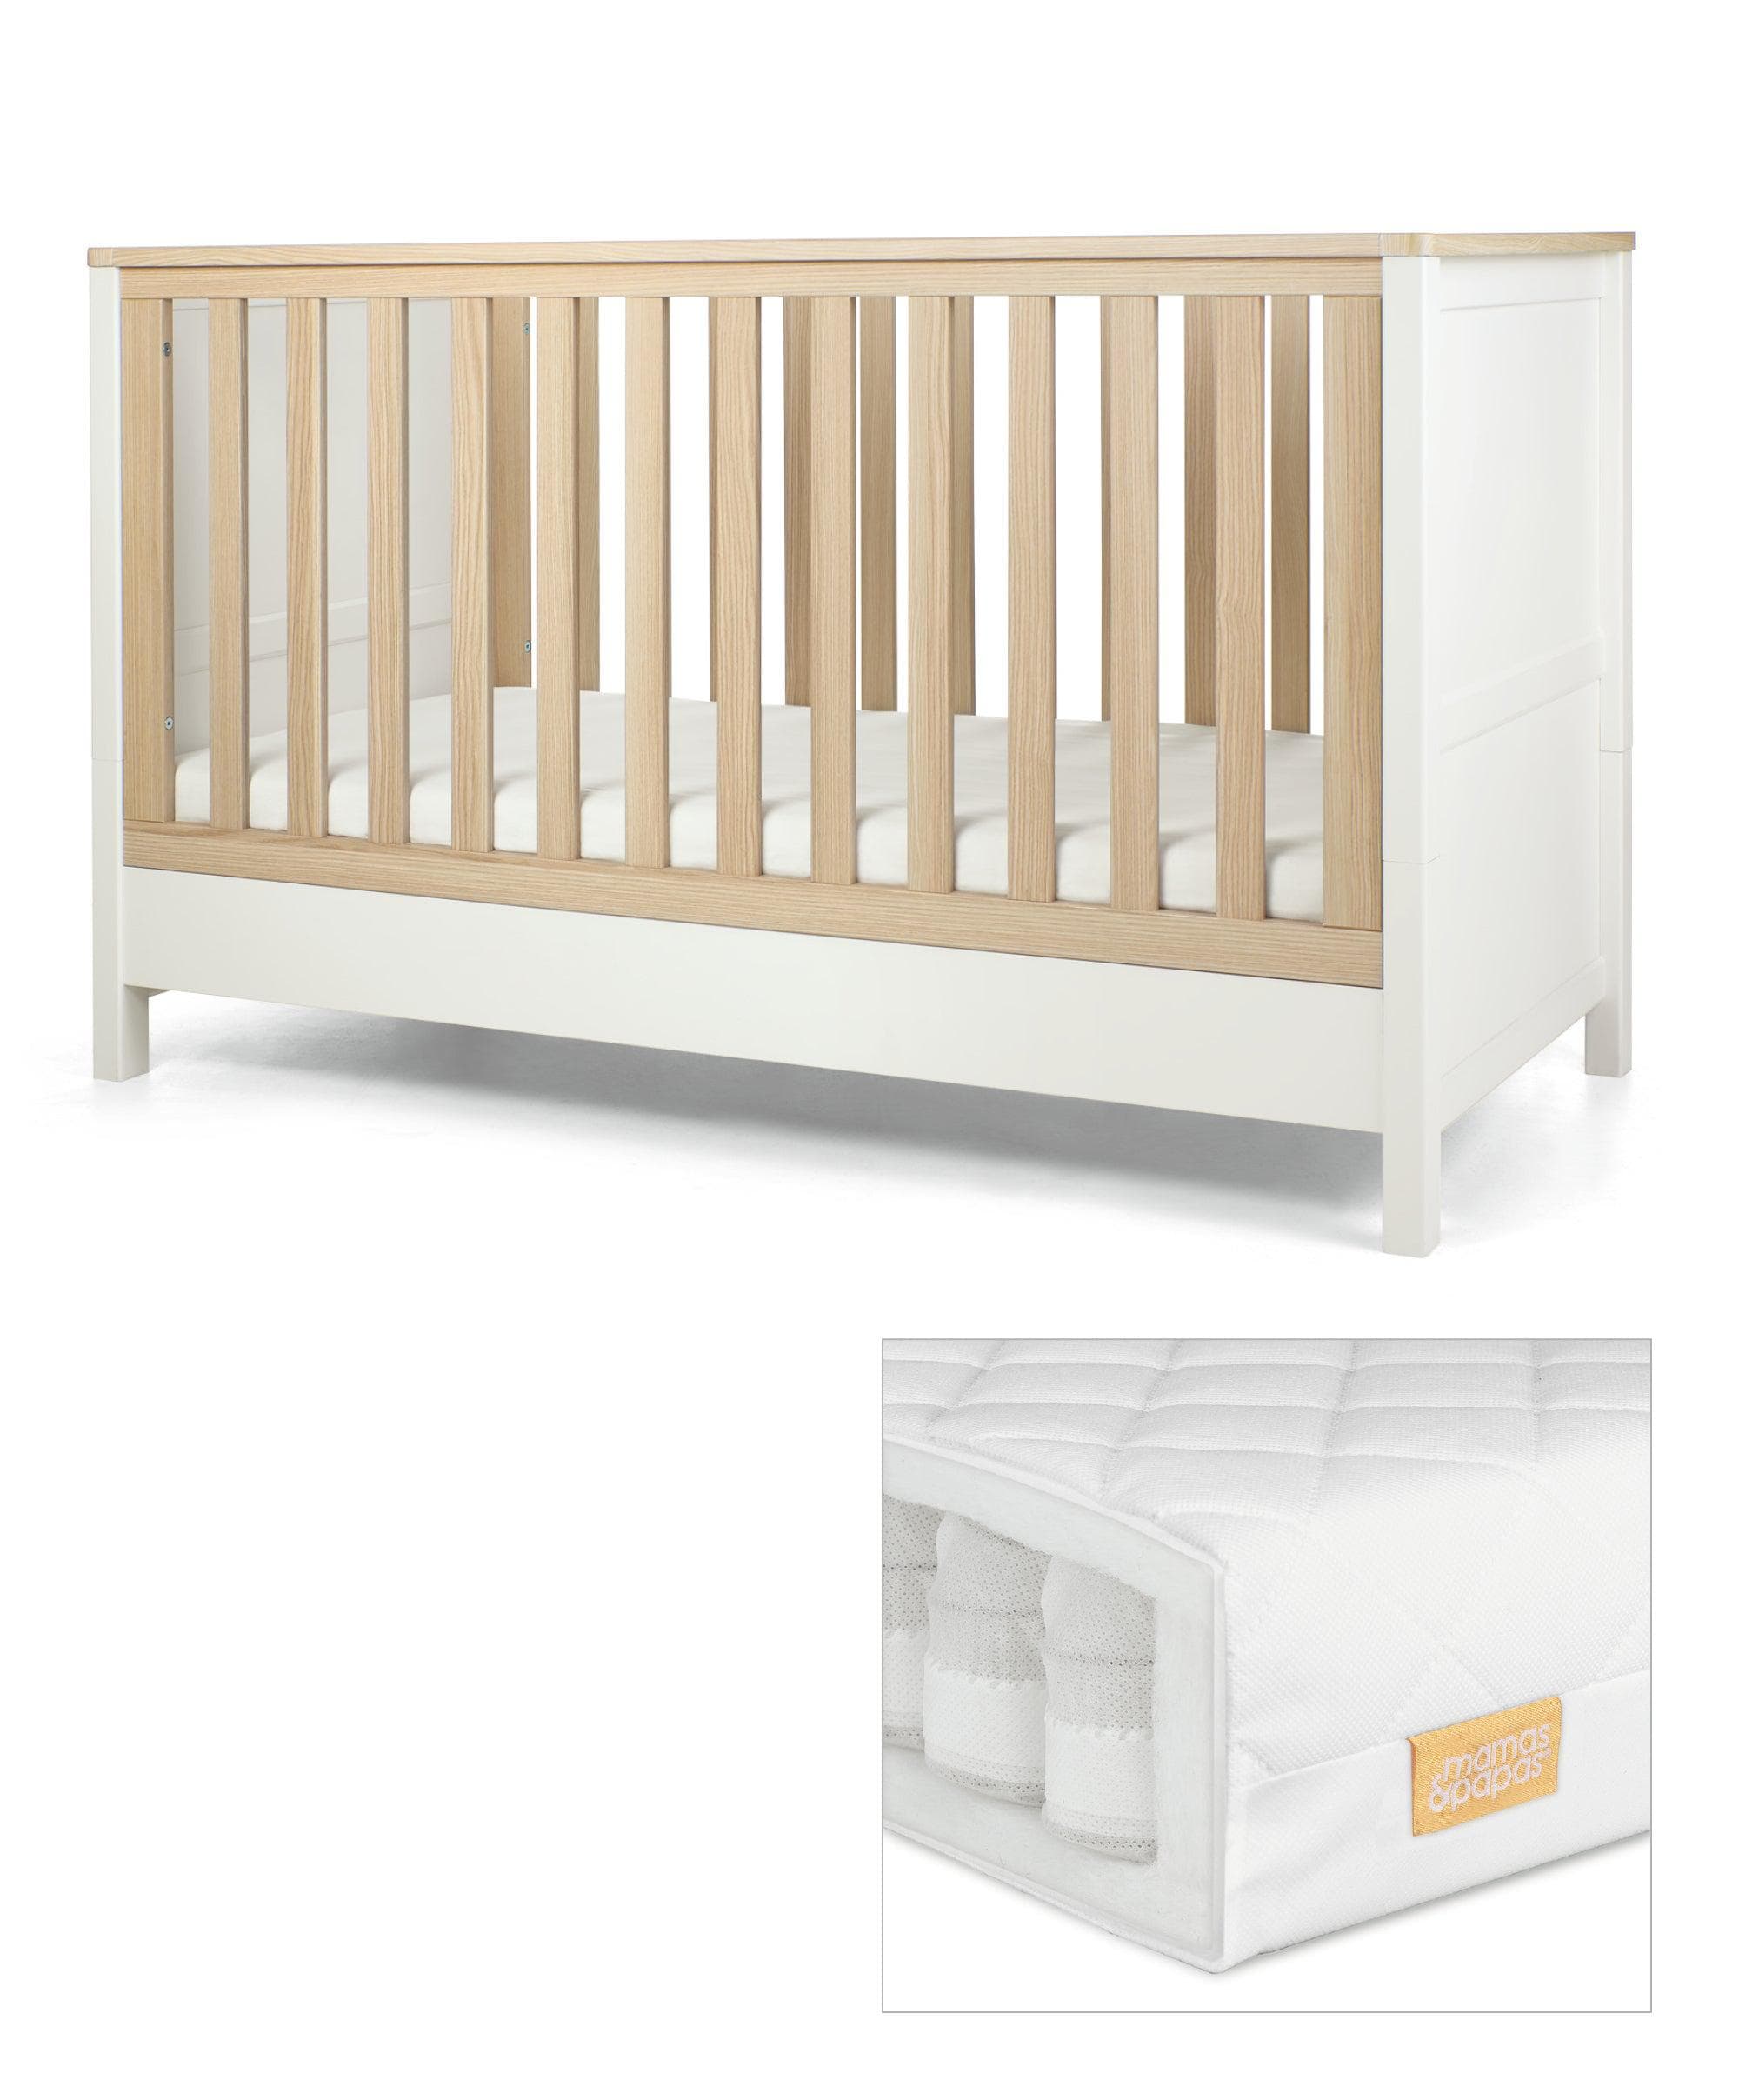 Harwell Cotbed Set with Essential Pocket Spring Mattress - White/Natural